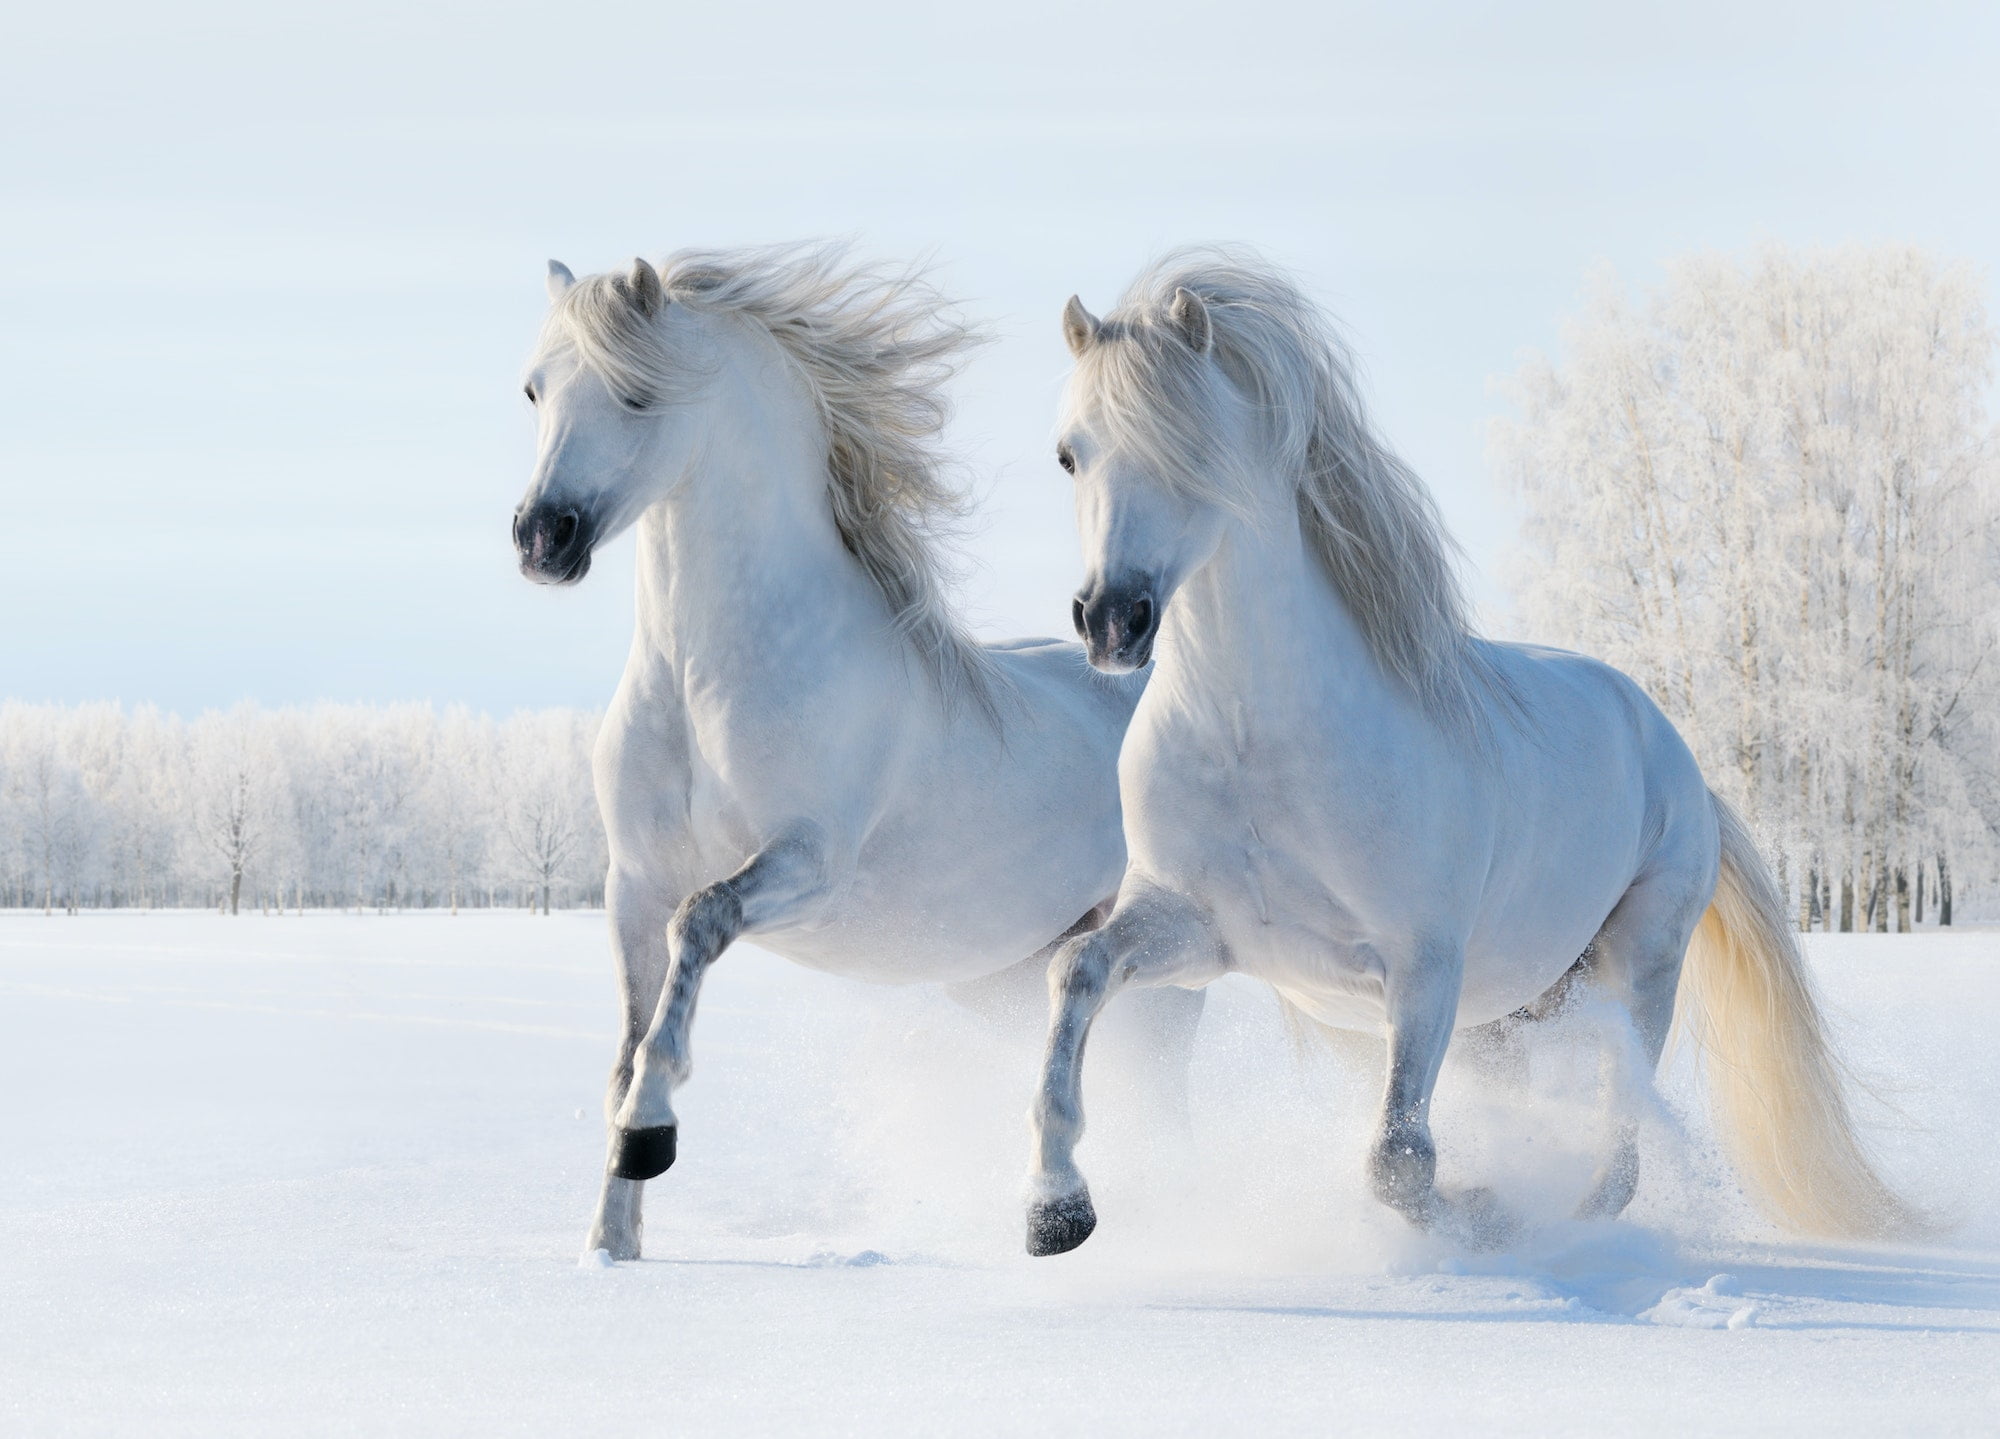 Two White Horses Gallop on snow field